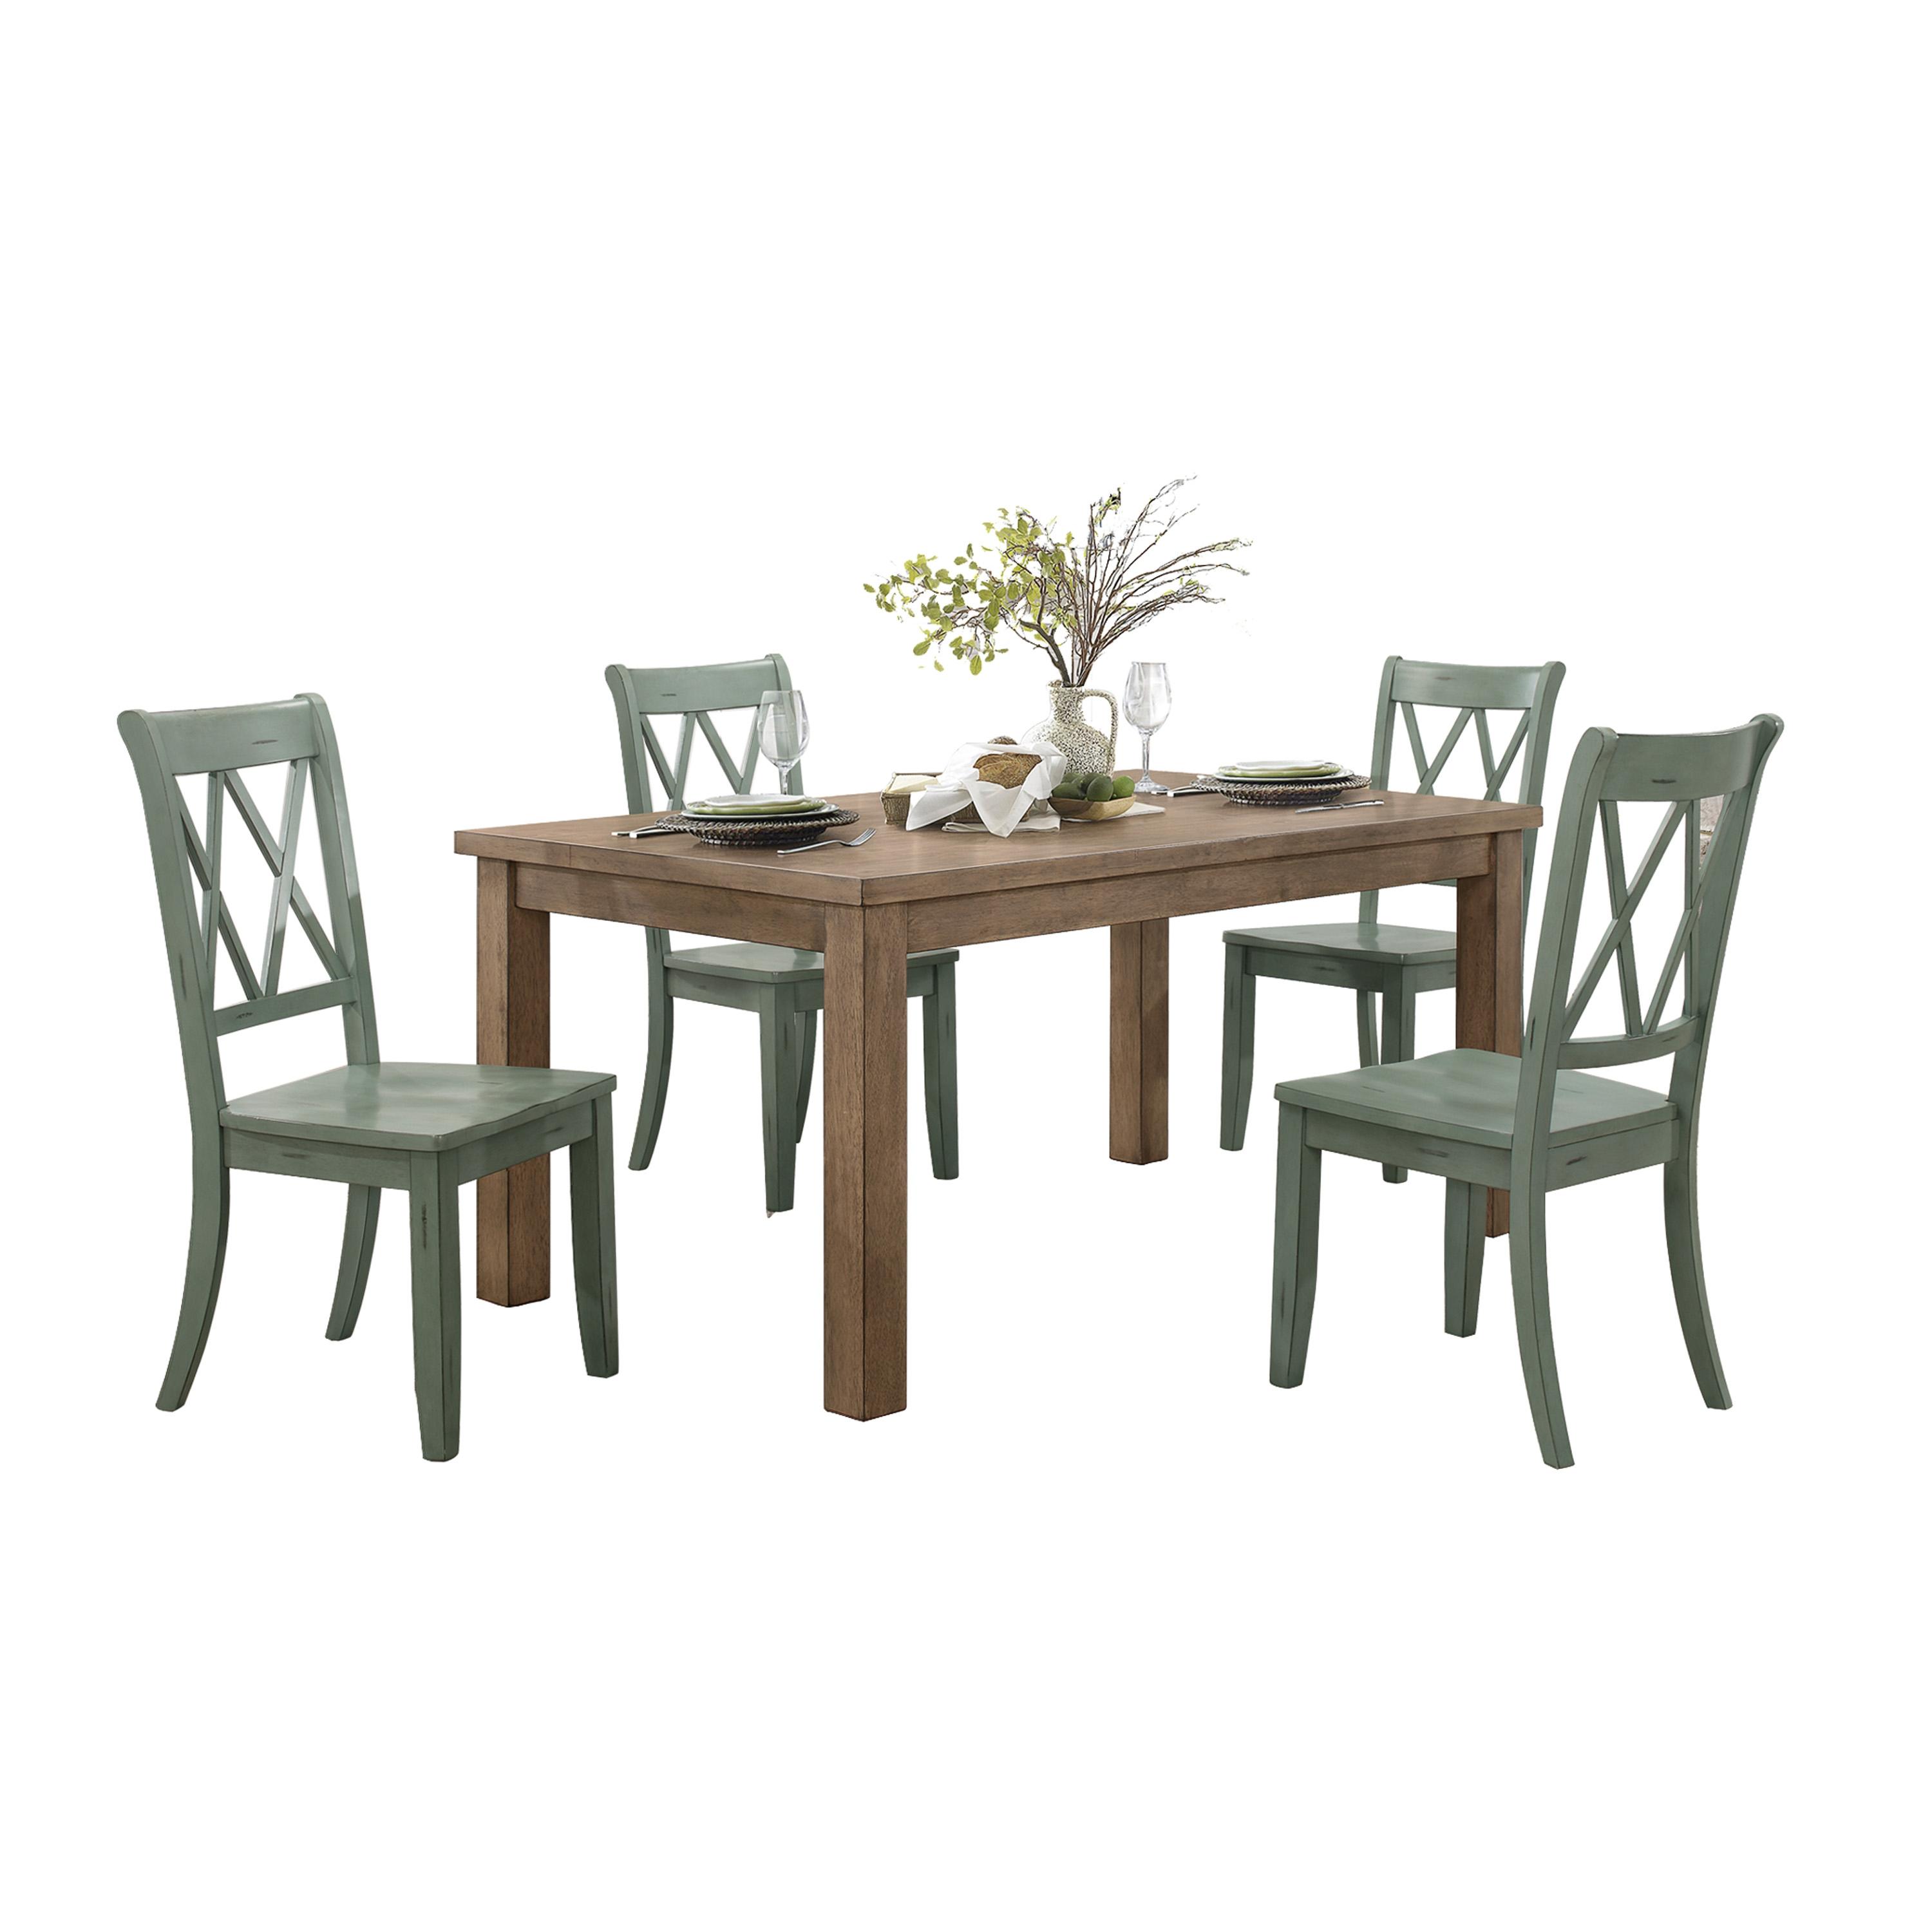 Transitional Dining Room Set 5516-66-TL*5PC Janina 5516-66-TL*5PC in Teal 